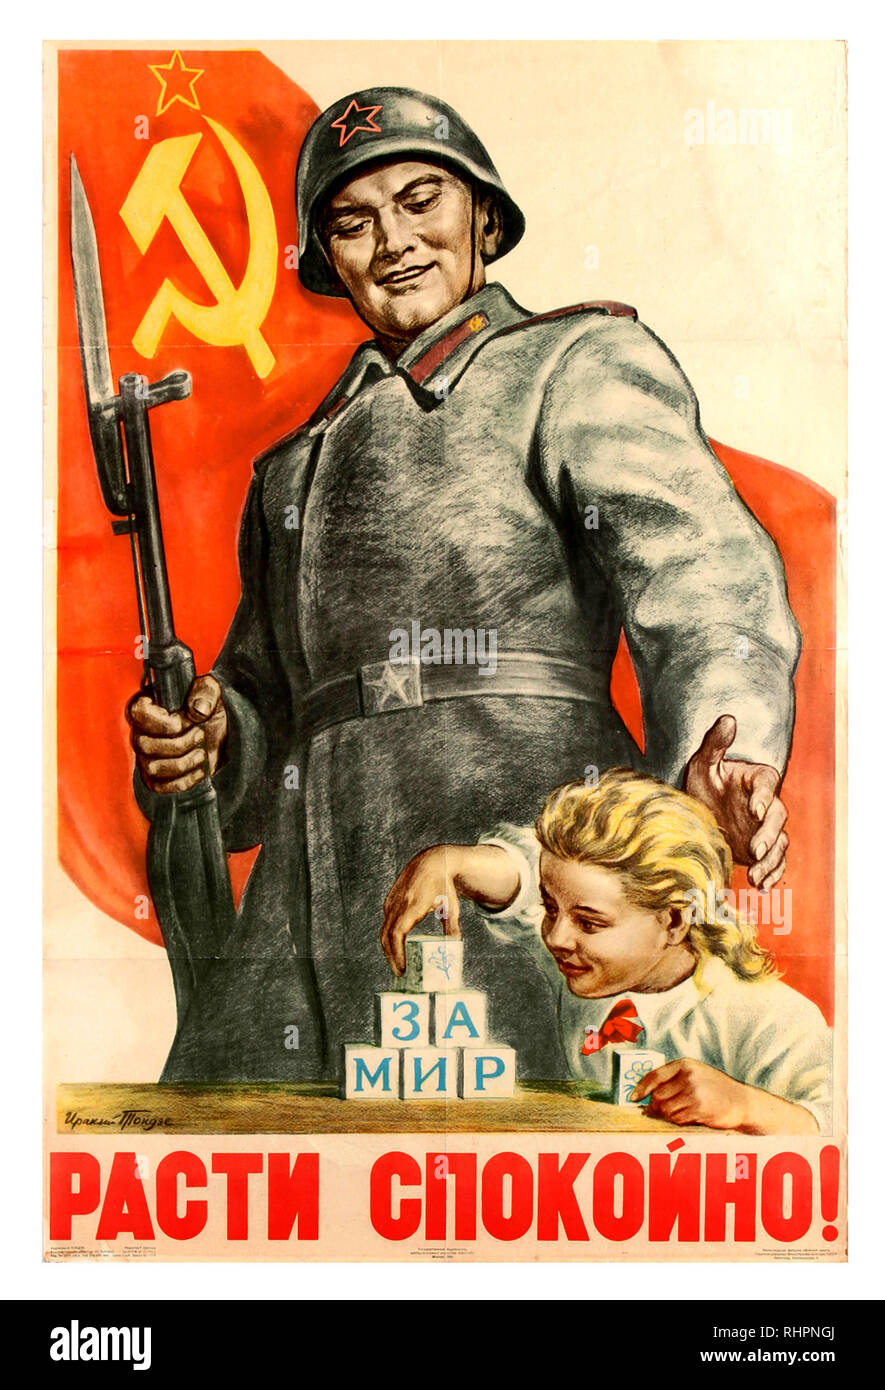 Original vintage Soviet propaganda poster: Grow up peacefully! featuring a smiling young girl playing with building blocks spelling out To Peace below a brick with the image of a flower on it, watched over by an armed soldier in uniform protecting her in front of a large red flag with the USSR Hammer and sickle emblem on it flying in the background, Stock Photo